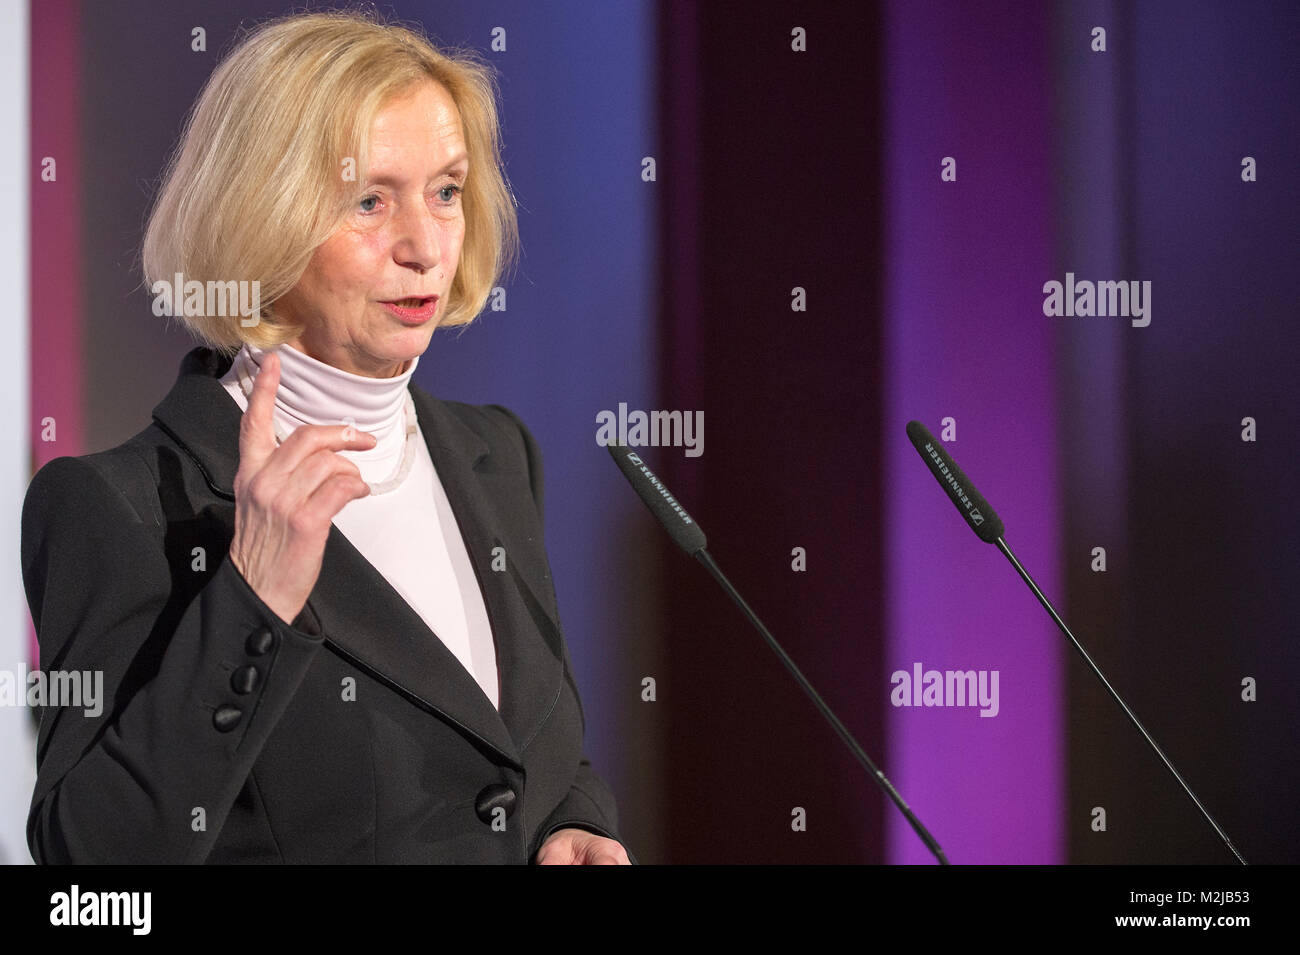 The newlt appointed Federal Minister for Education Johanna Wanka gives her 1st speech at the Natural History Museum about Science. Is the begining of the year of science. Stock Photo